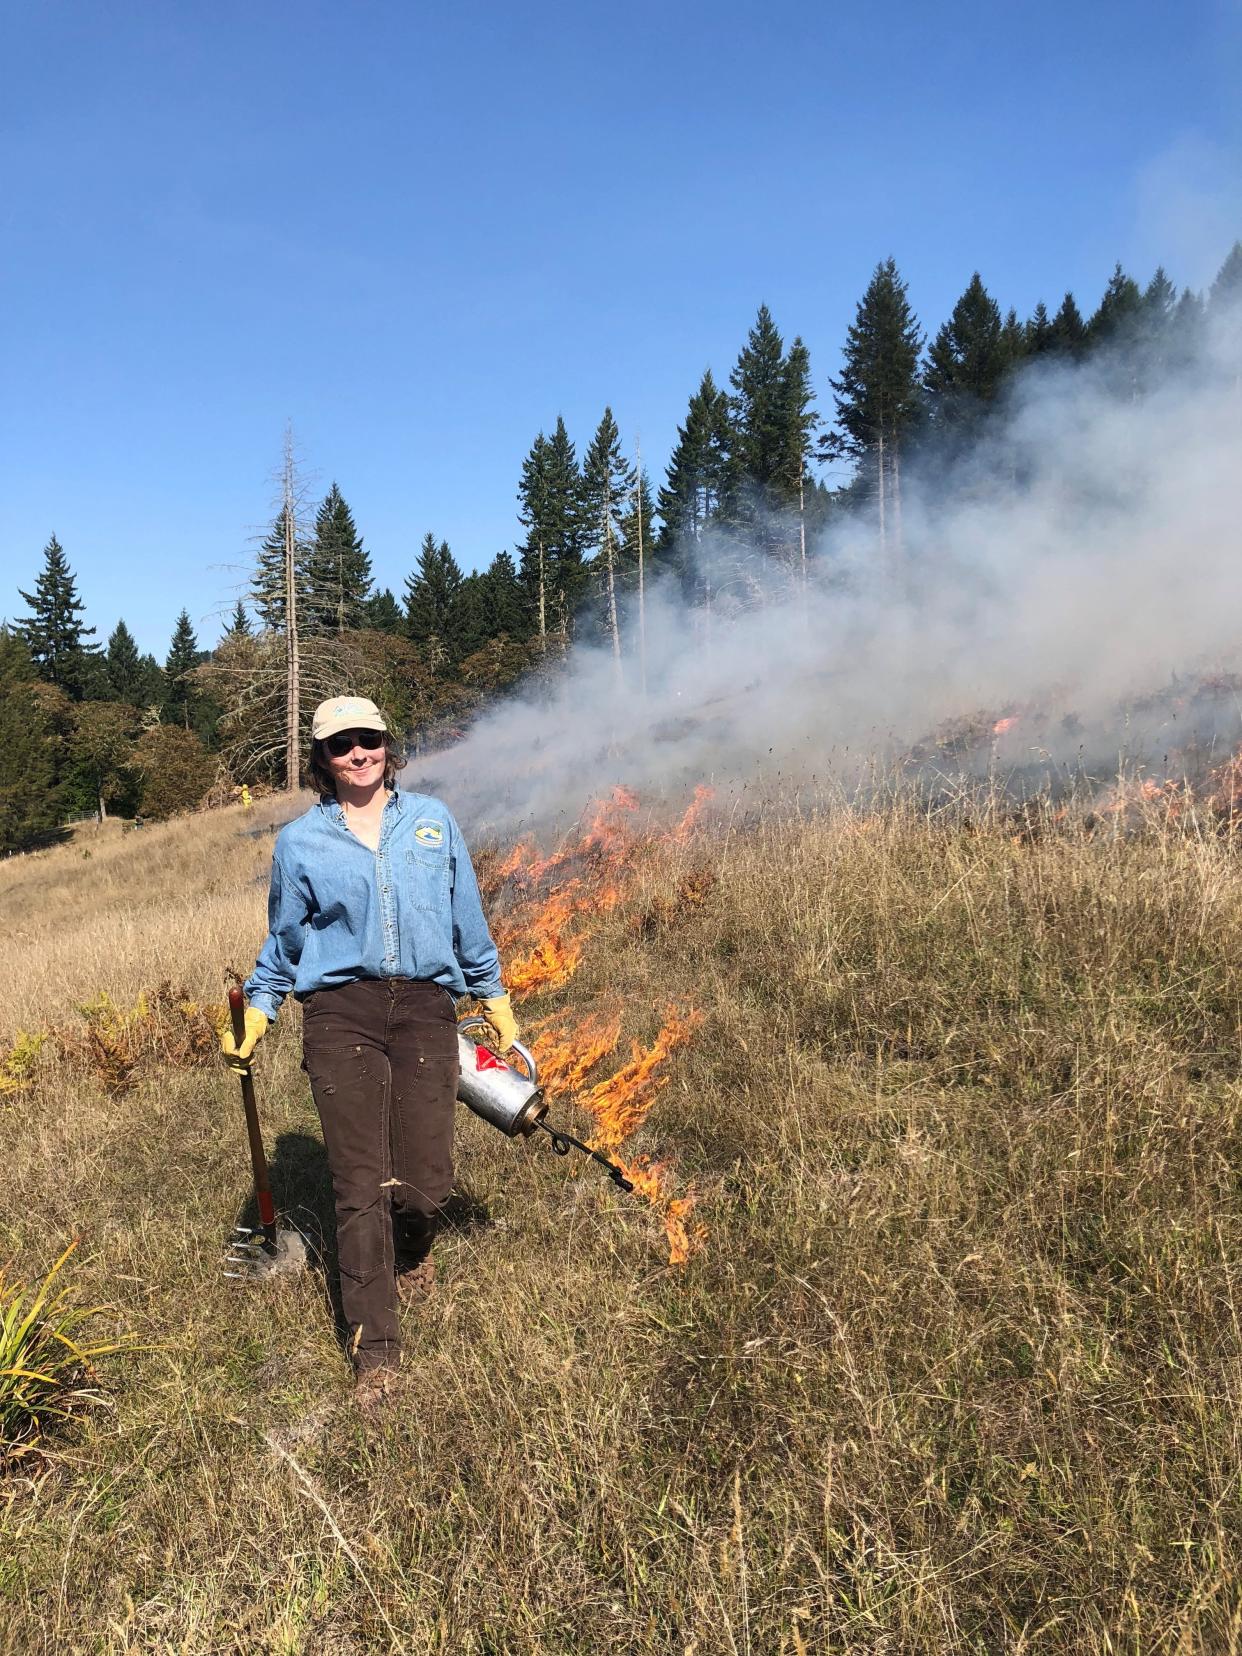 A prescribed fire training in Humboldt County, Calif., taught by the Humboldt Prescribed Burn Association in October 2019.